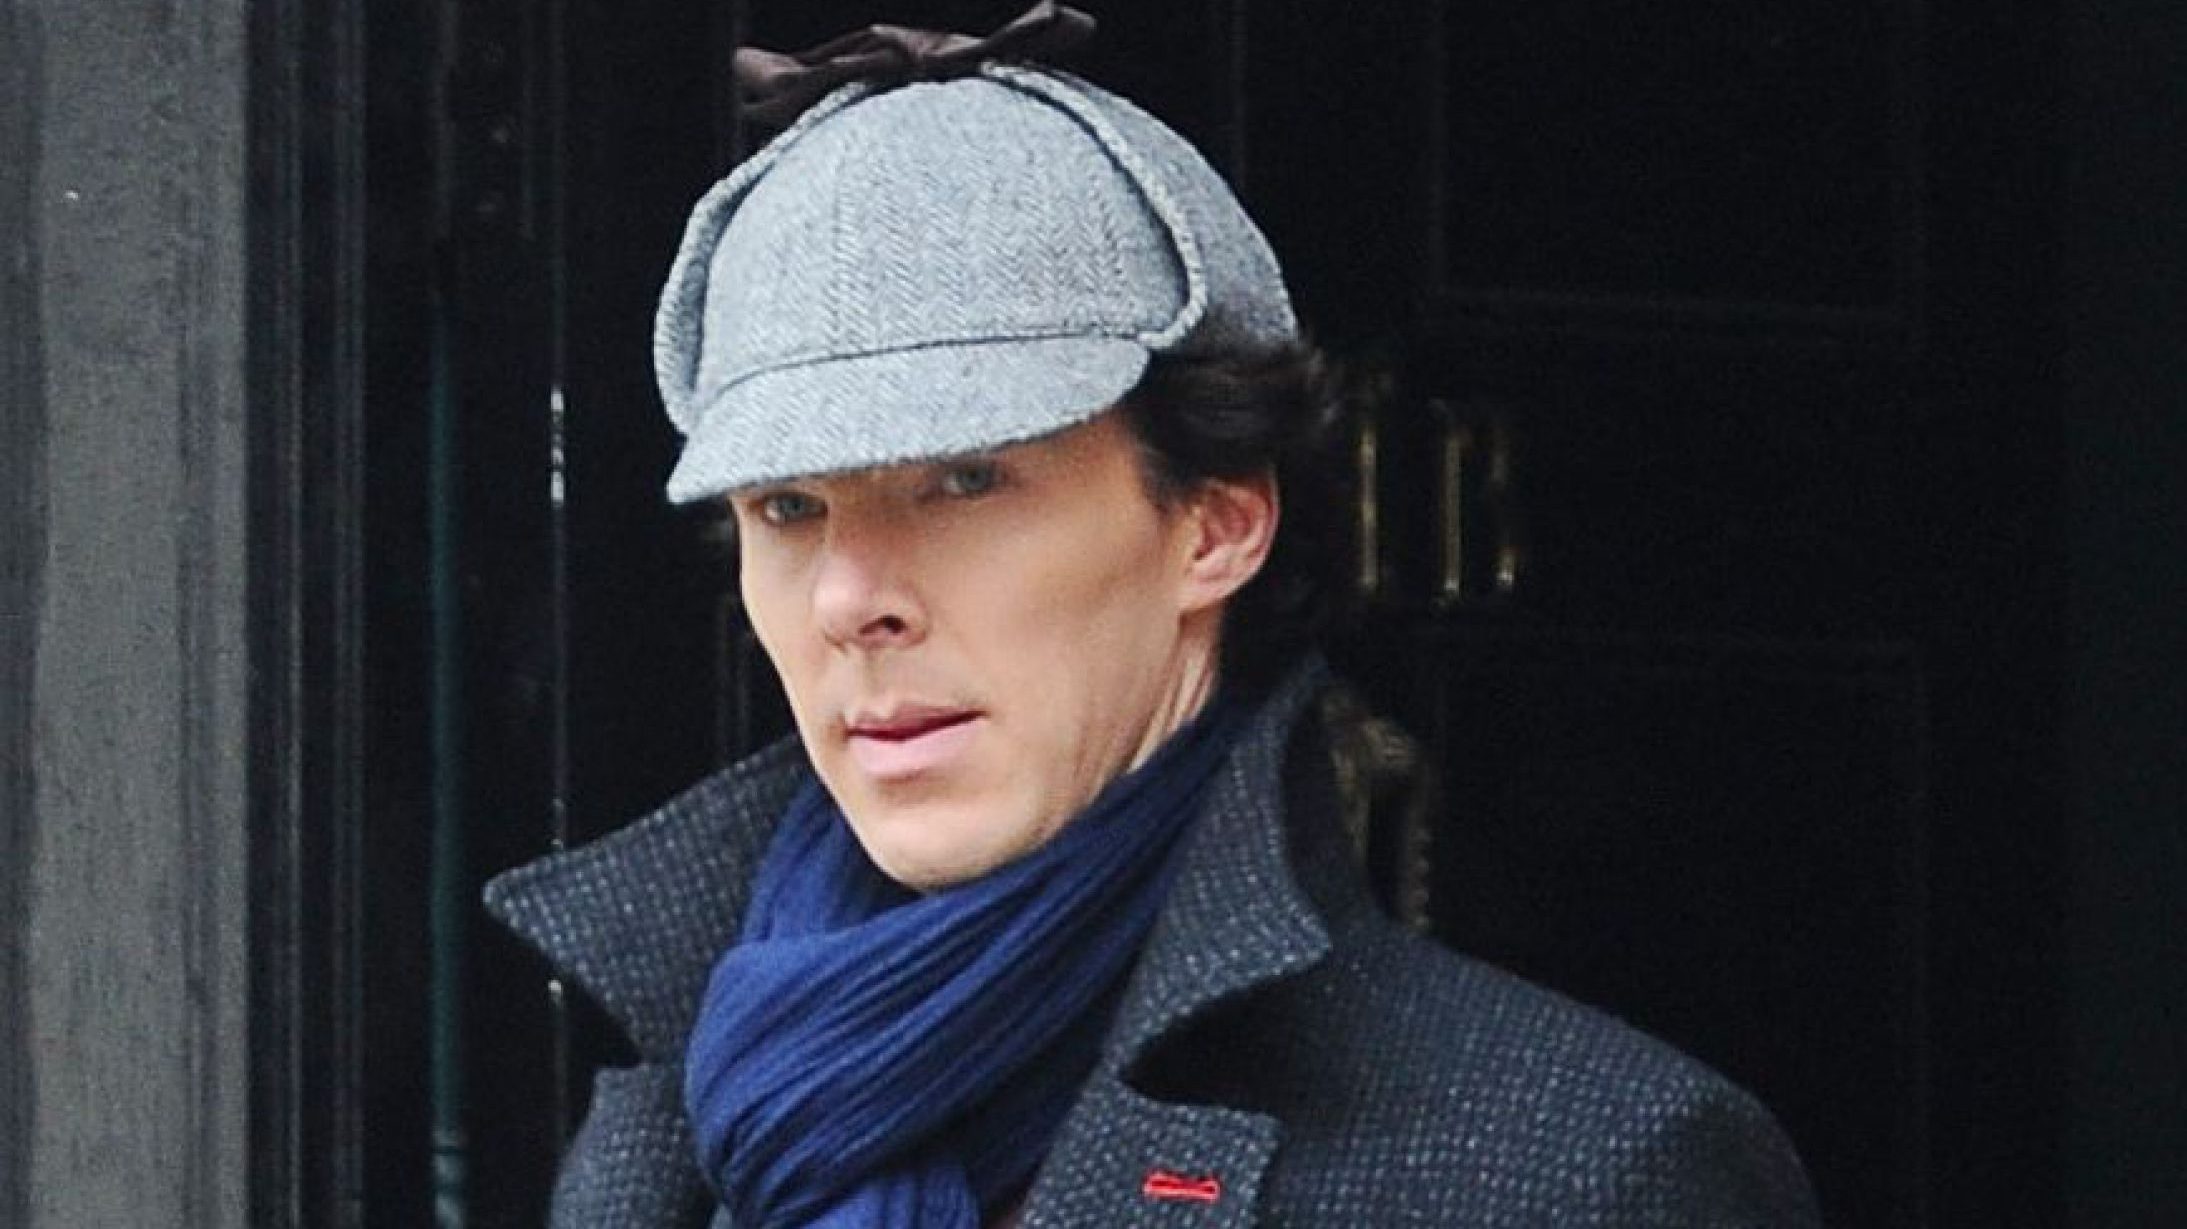 Benedict Cumberbatch as Sherlock homes filming in London for the new Season 4